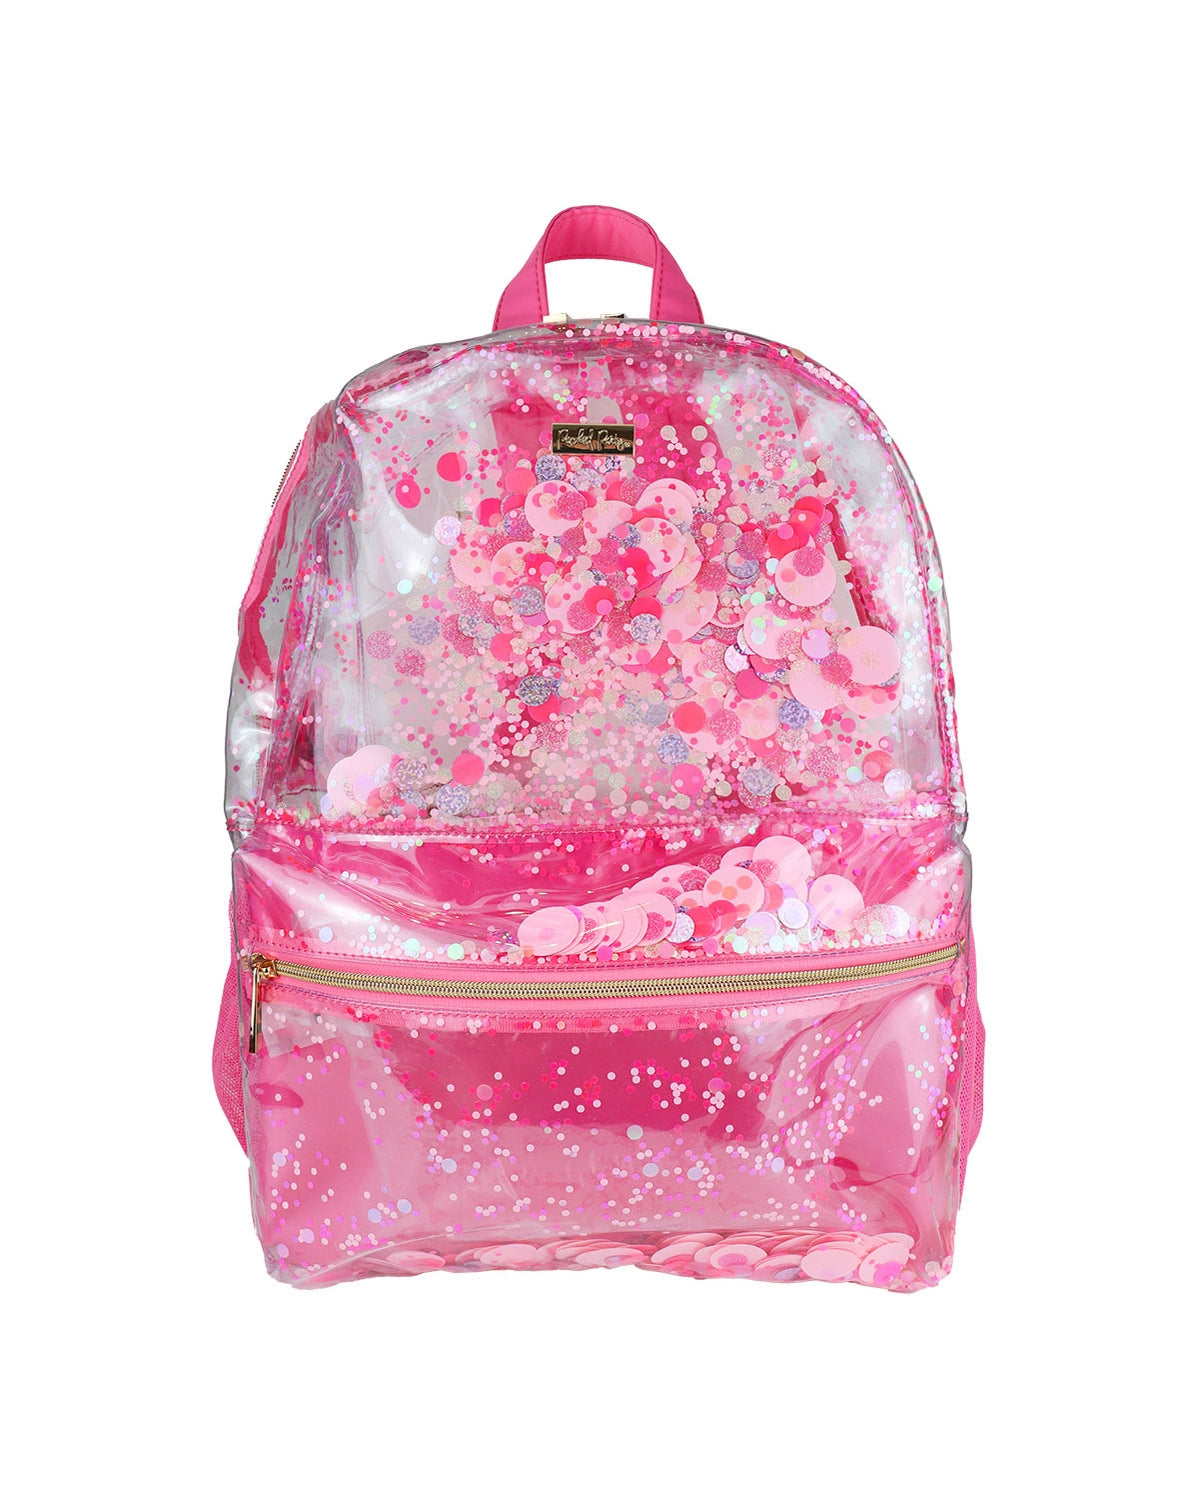 Pink Party Confetti Clear Backpack